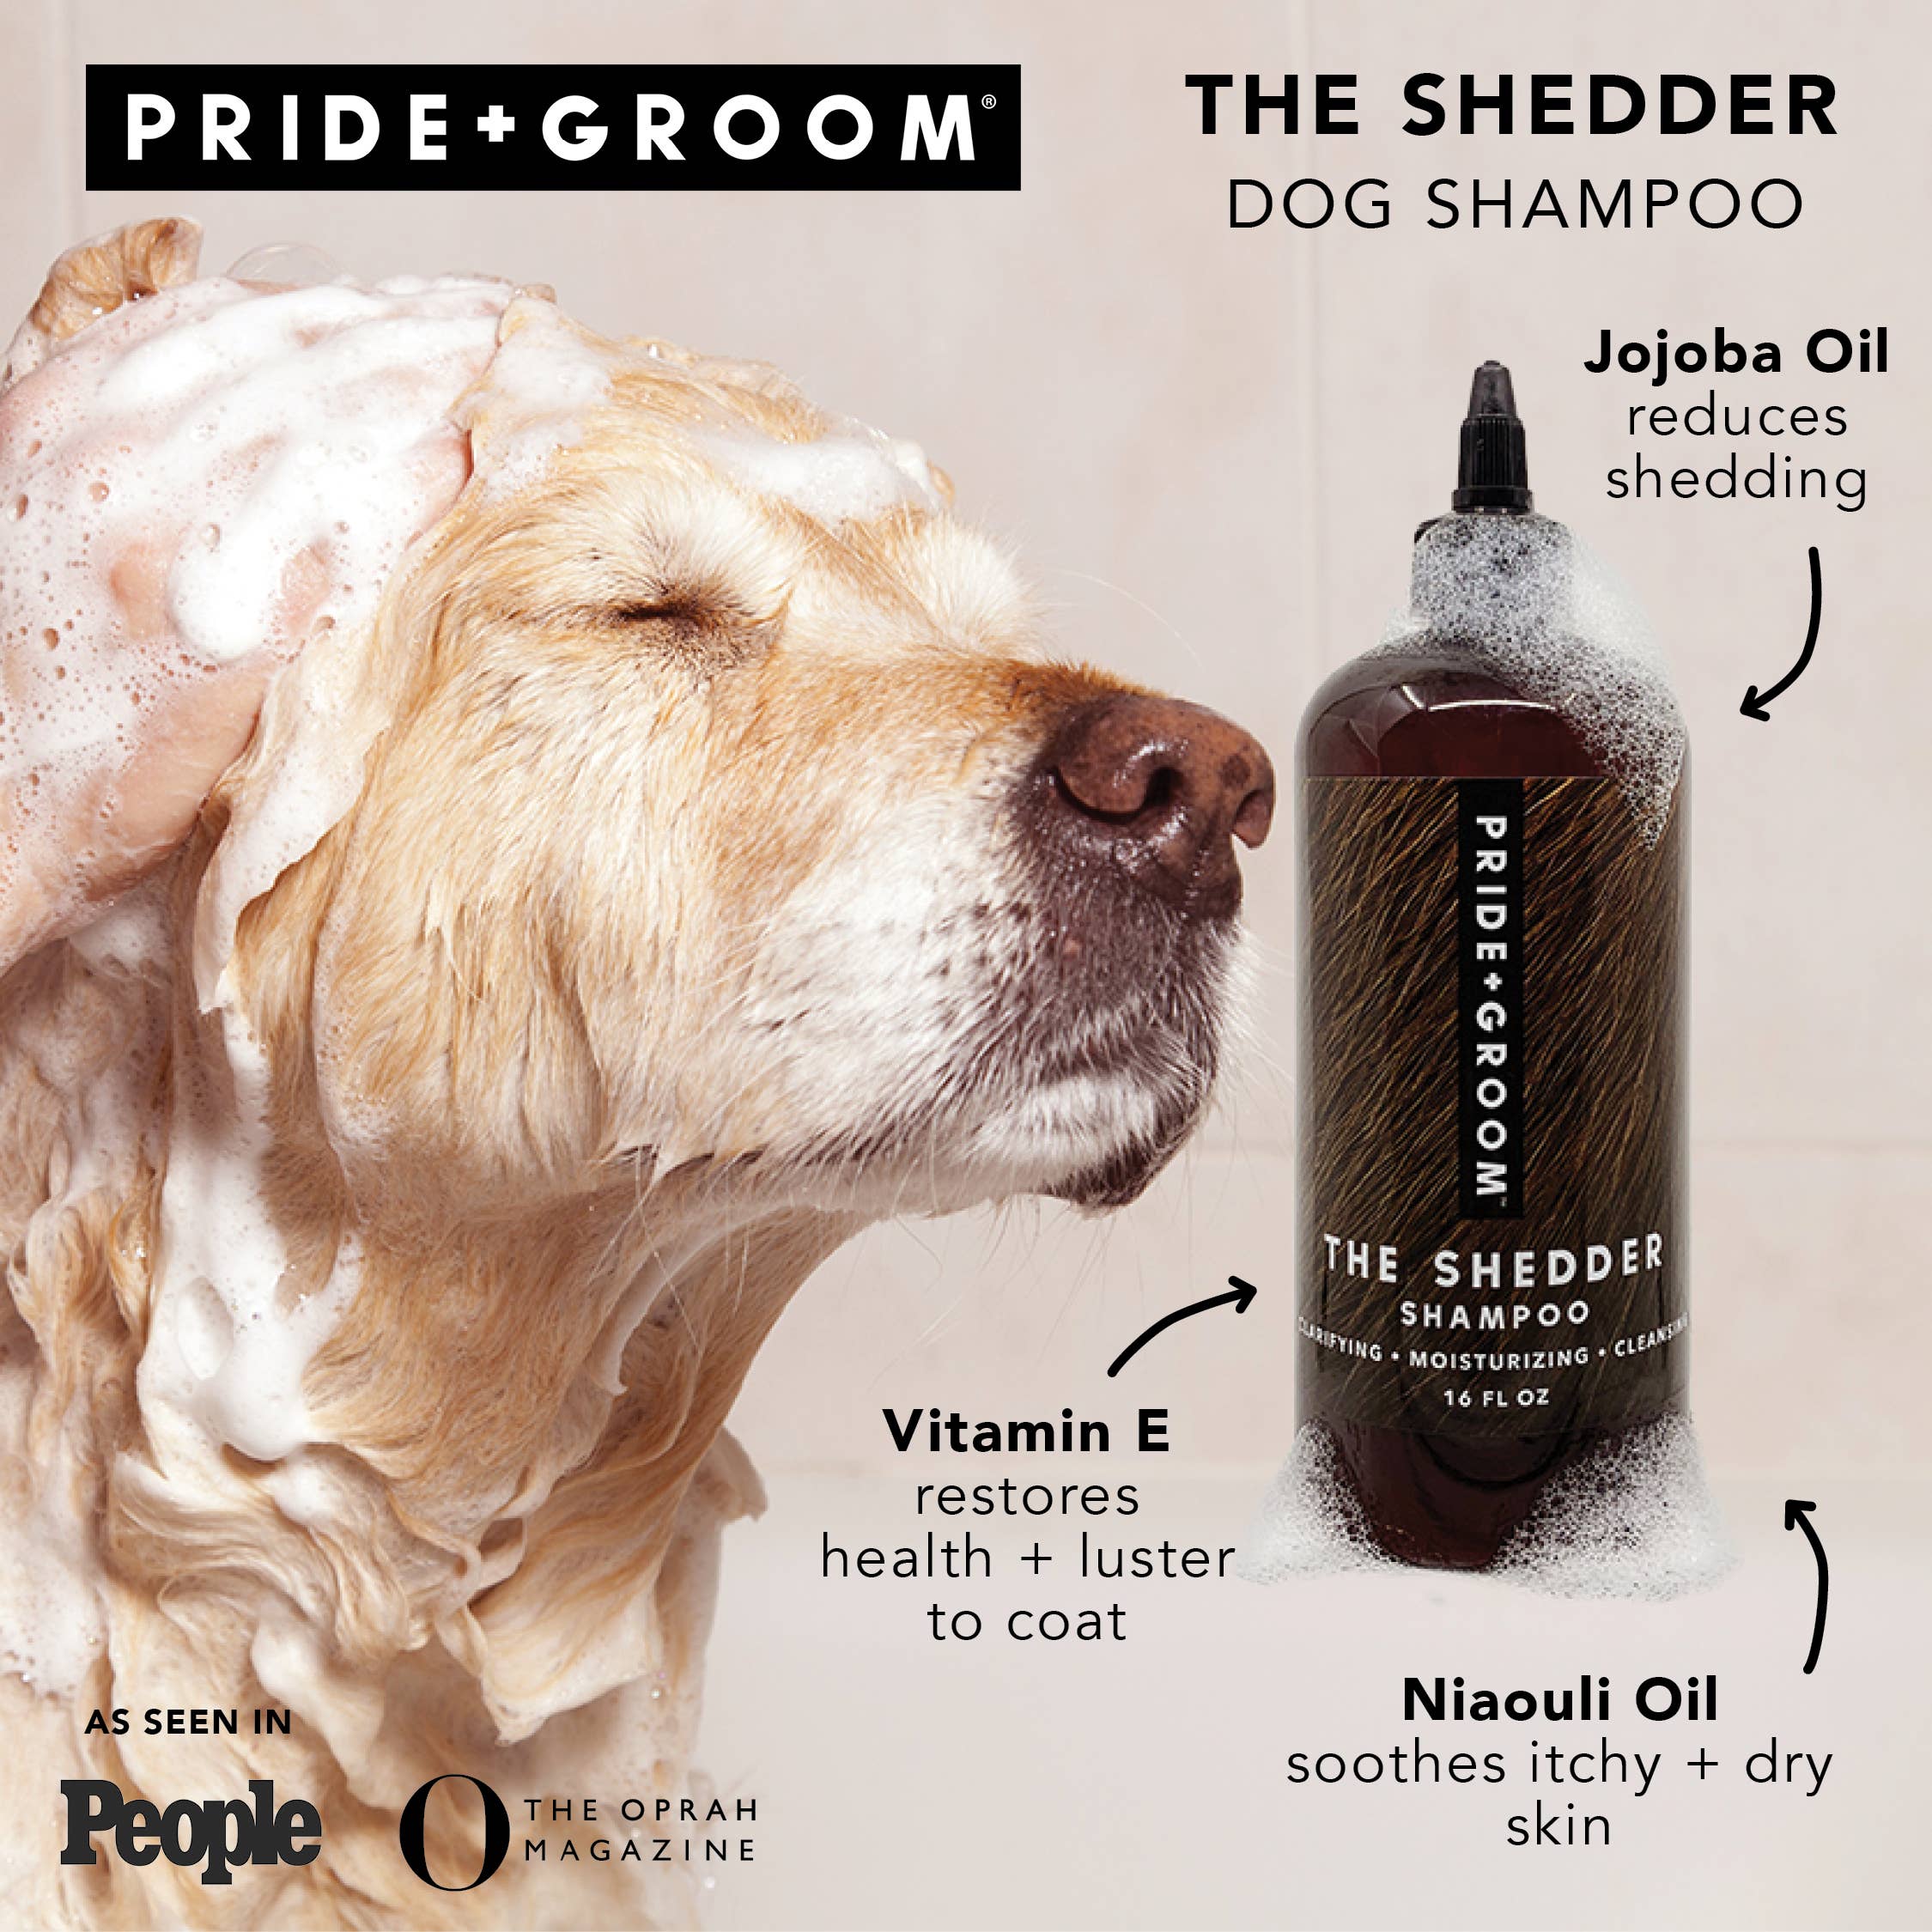 PRIDE + GROOM - THE SHEDDER | SHAMPOO FOR DOGS WHO SHED: 12 oz